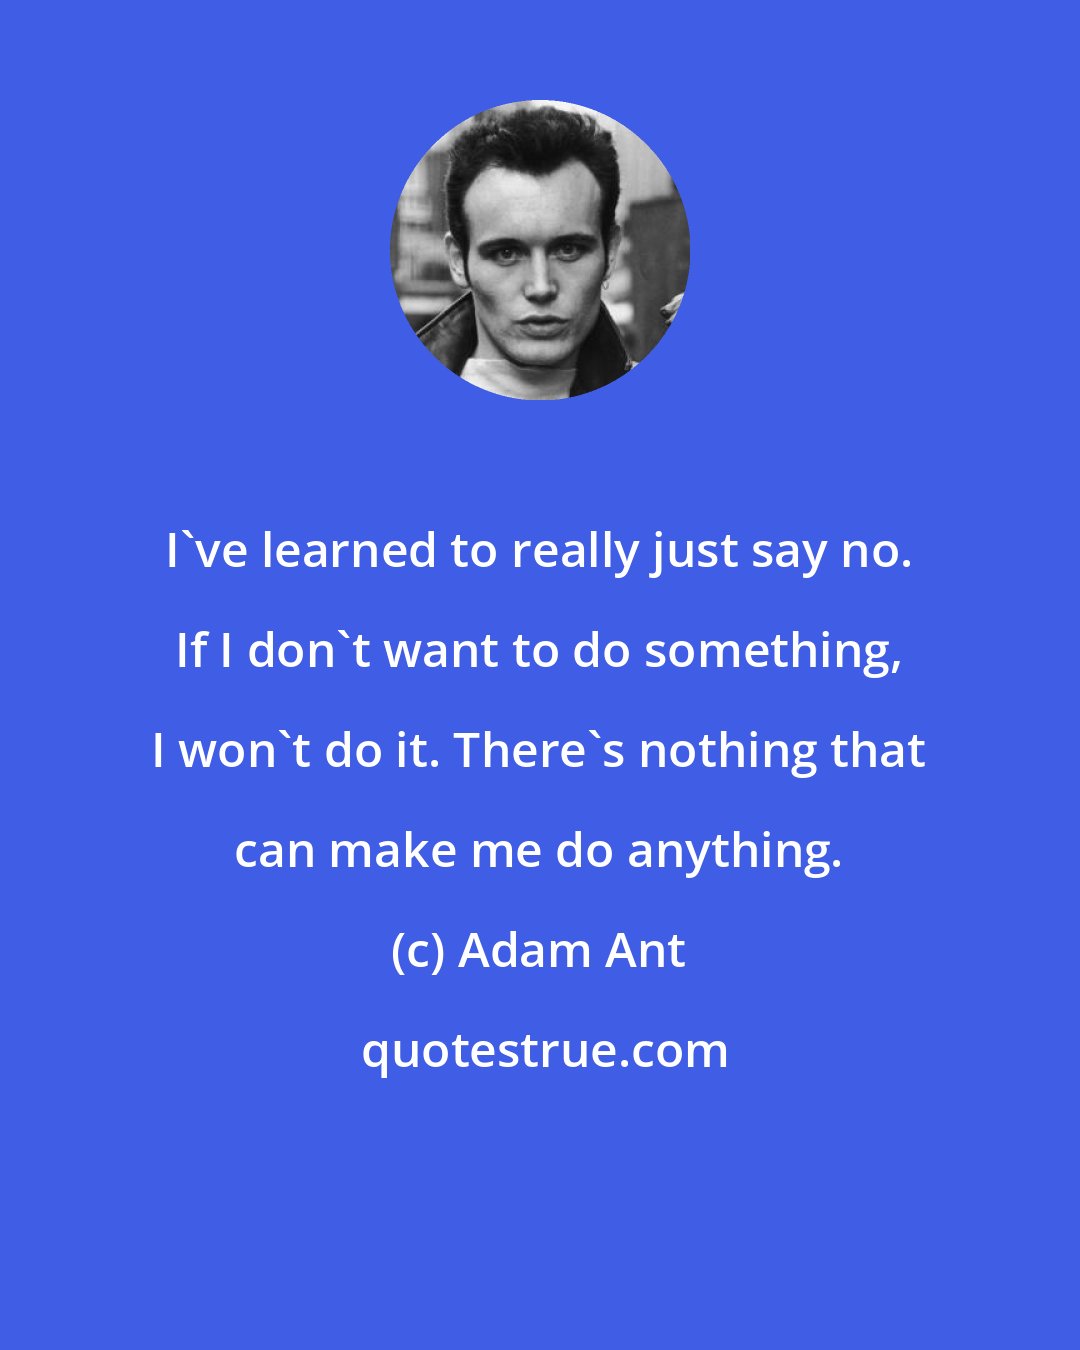 Adam Ant: I've learned to really just say no. If I don't want to do something, I won't do it. There's nothing that can make me do anything.